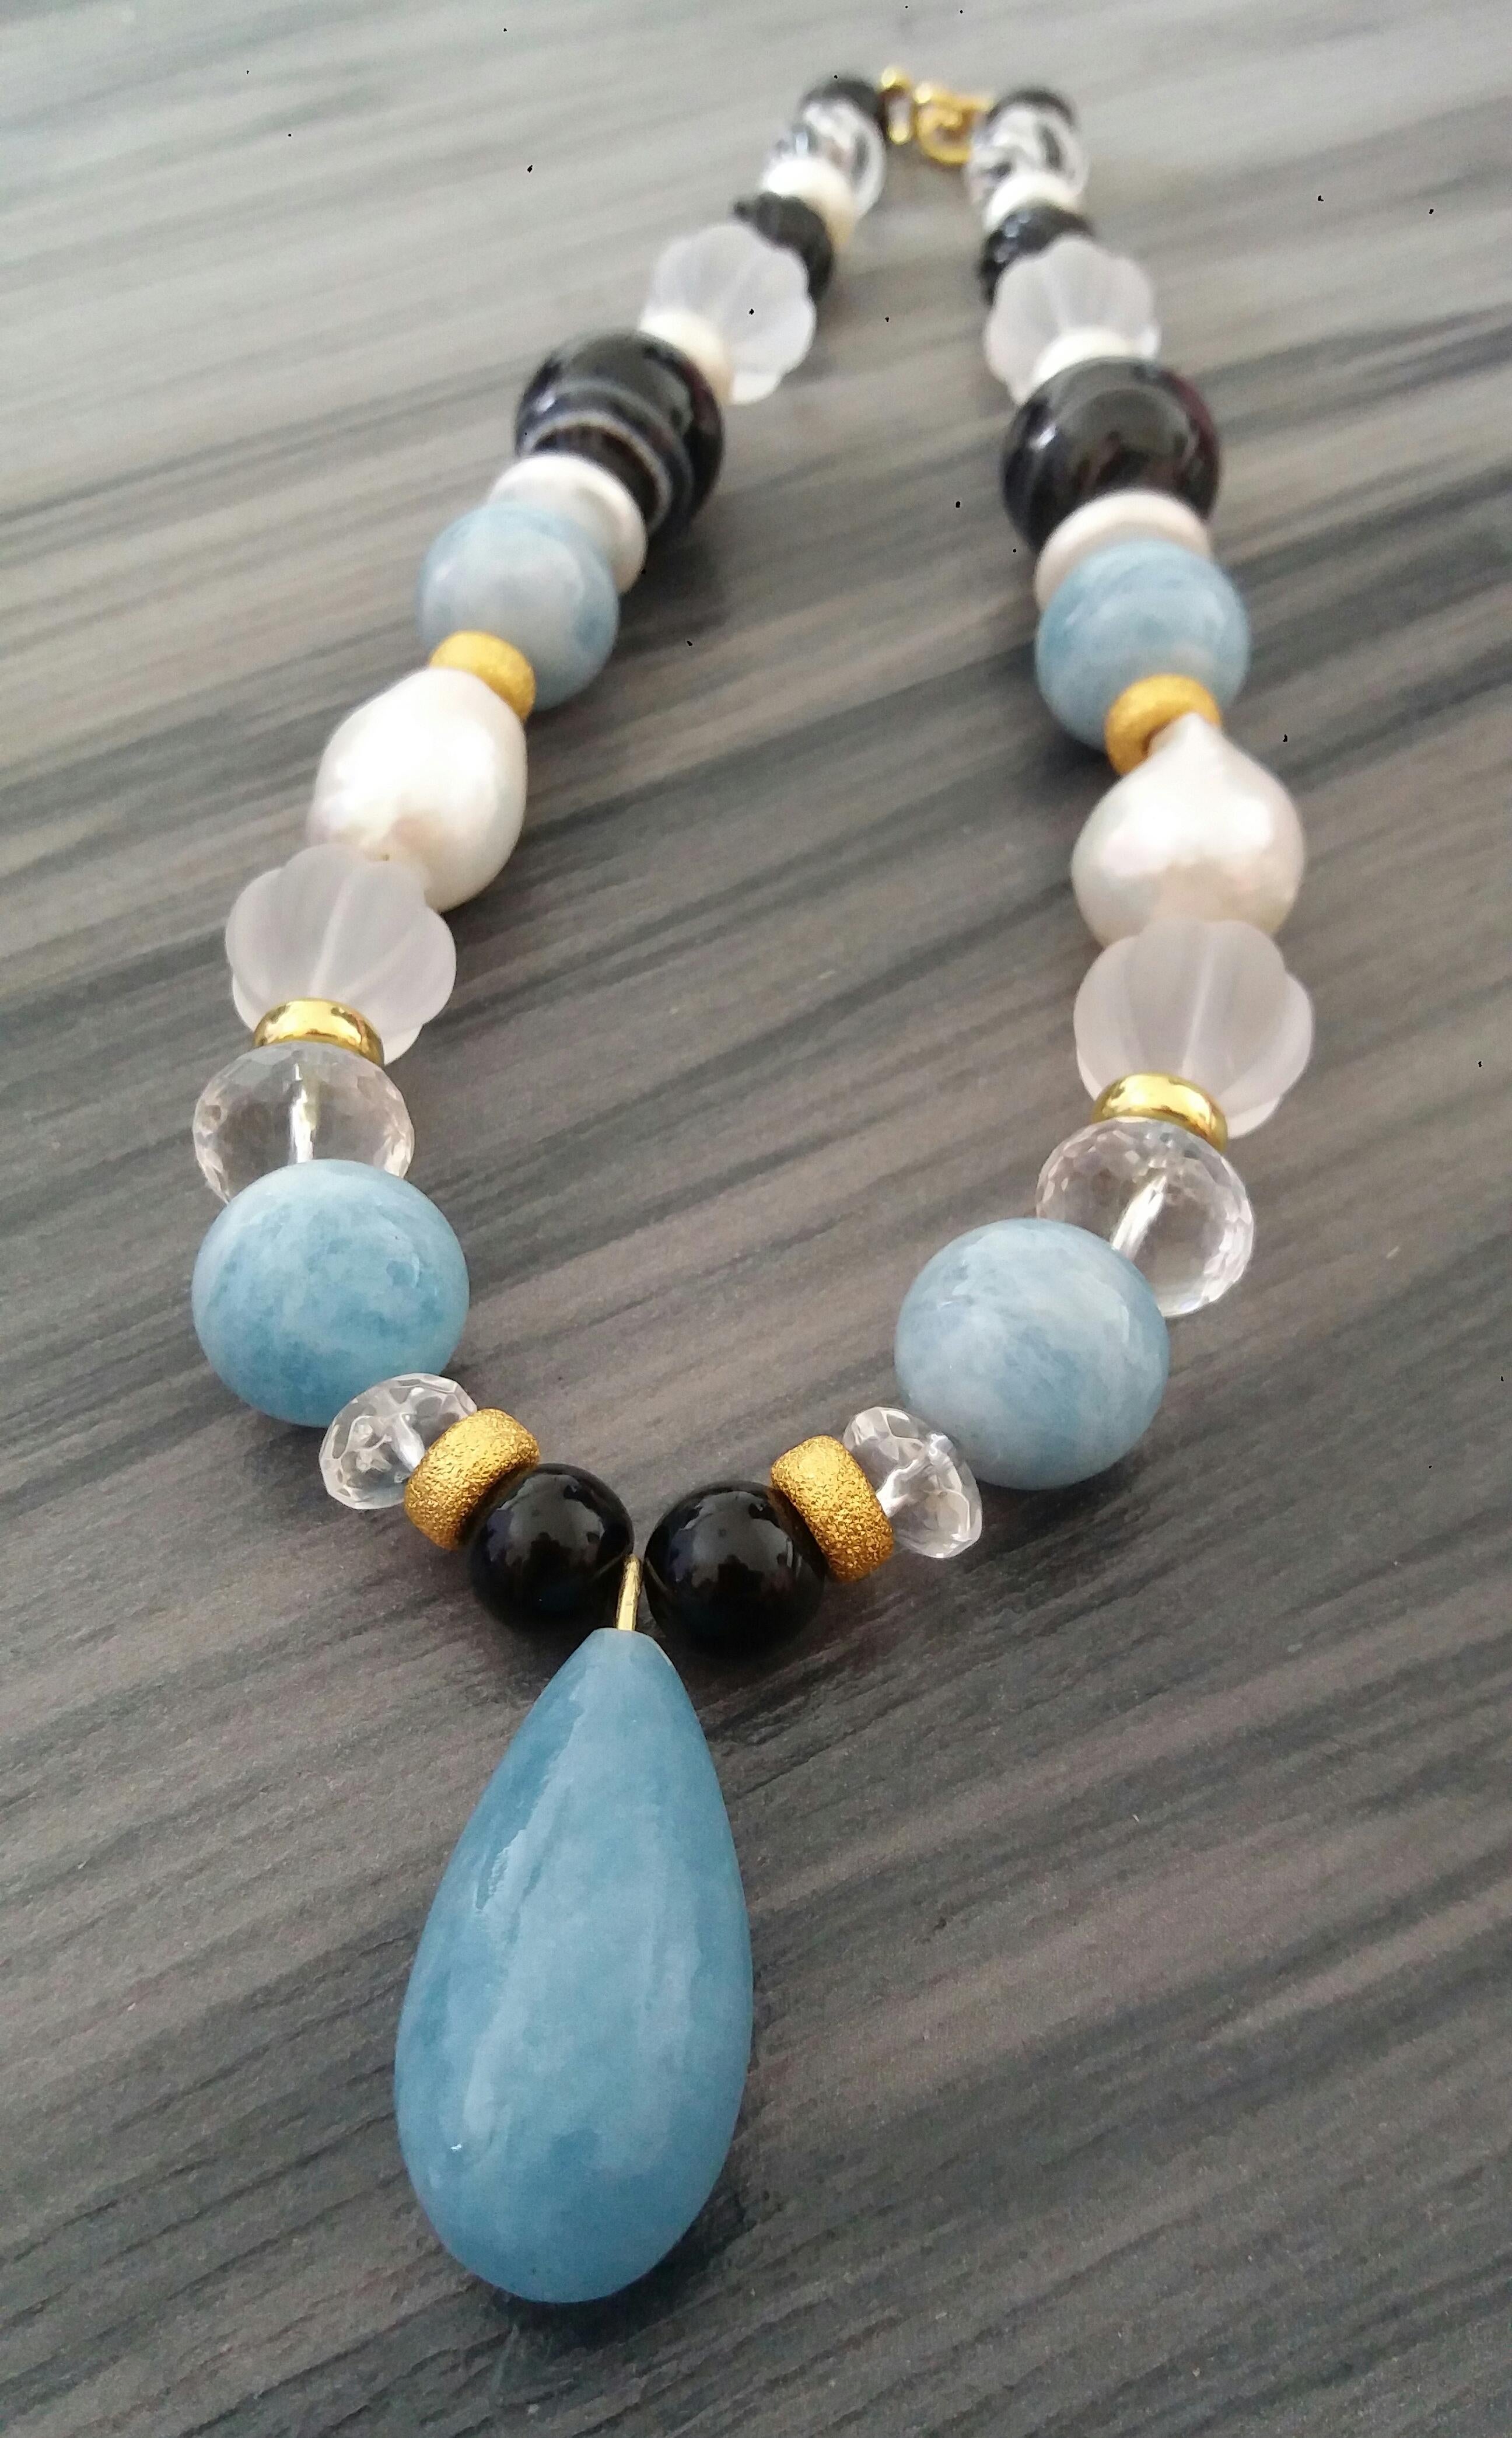 Mixed Cut Aquamarine Beads And Pendant Baroque Pearls Quartz Onyx Yellow Gold Necklace For Sale